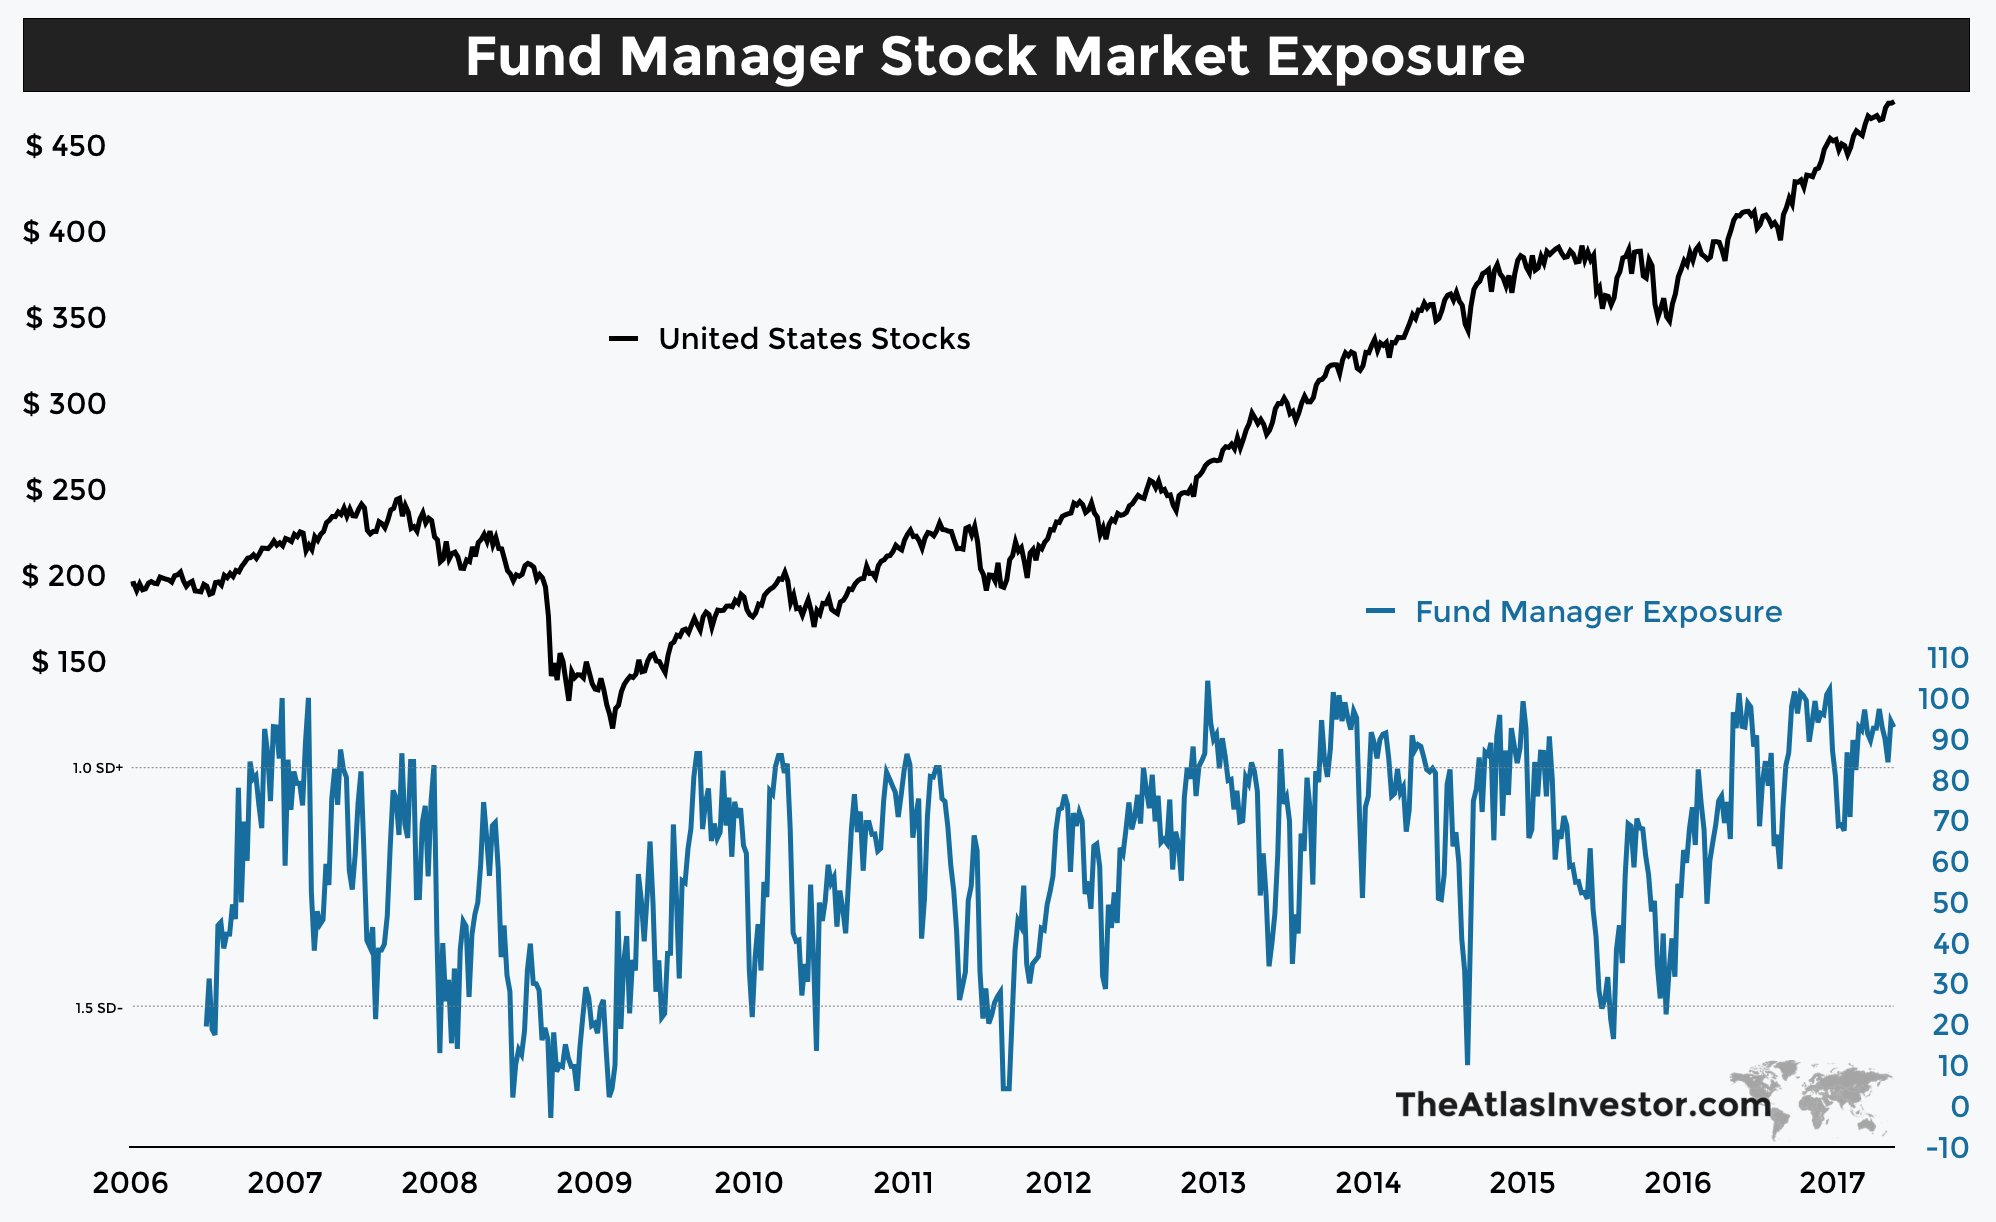 Fund Manager Stock Market Exposure